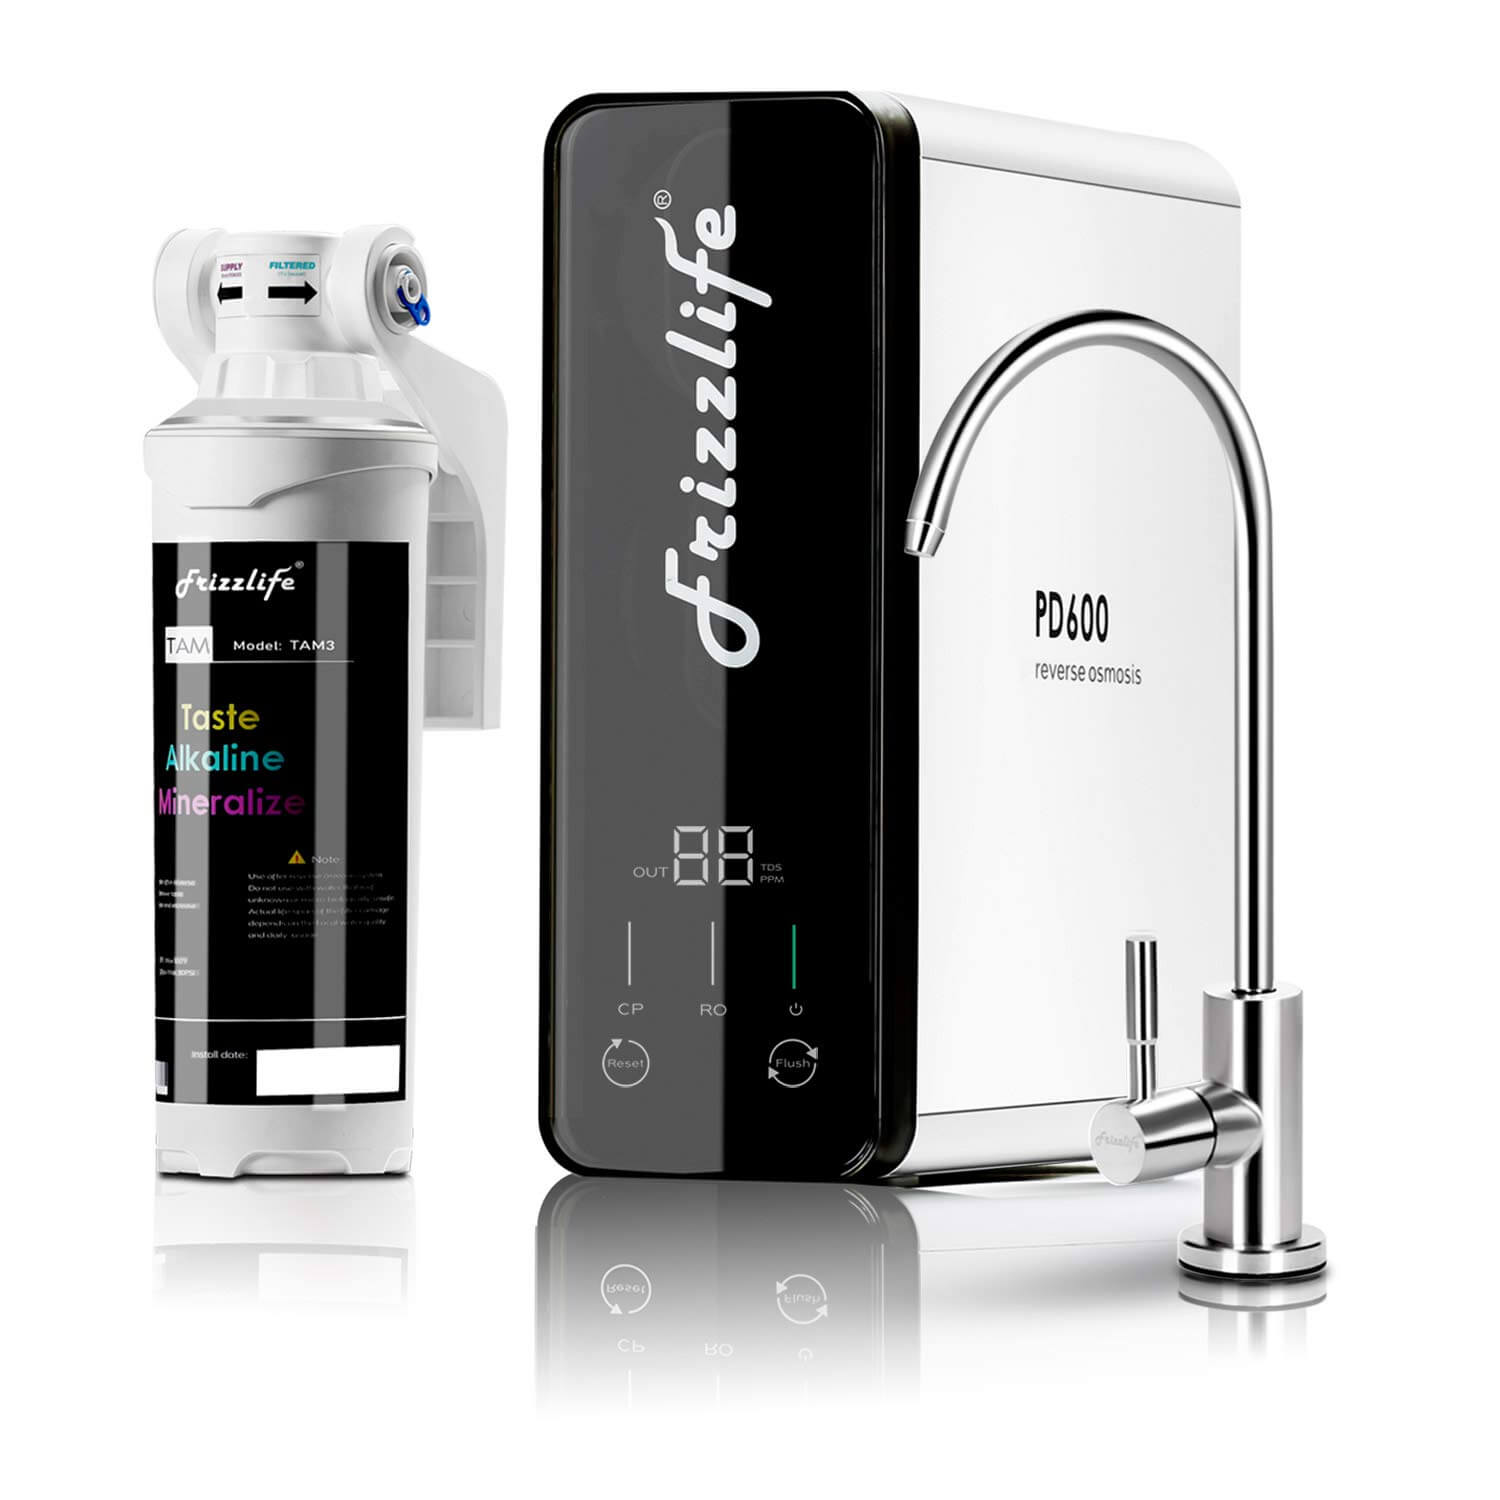 Frizzlife RO Water Filtration System